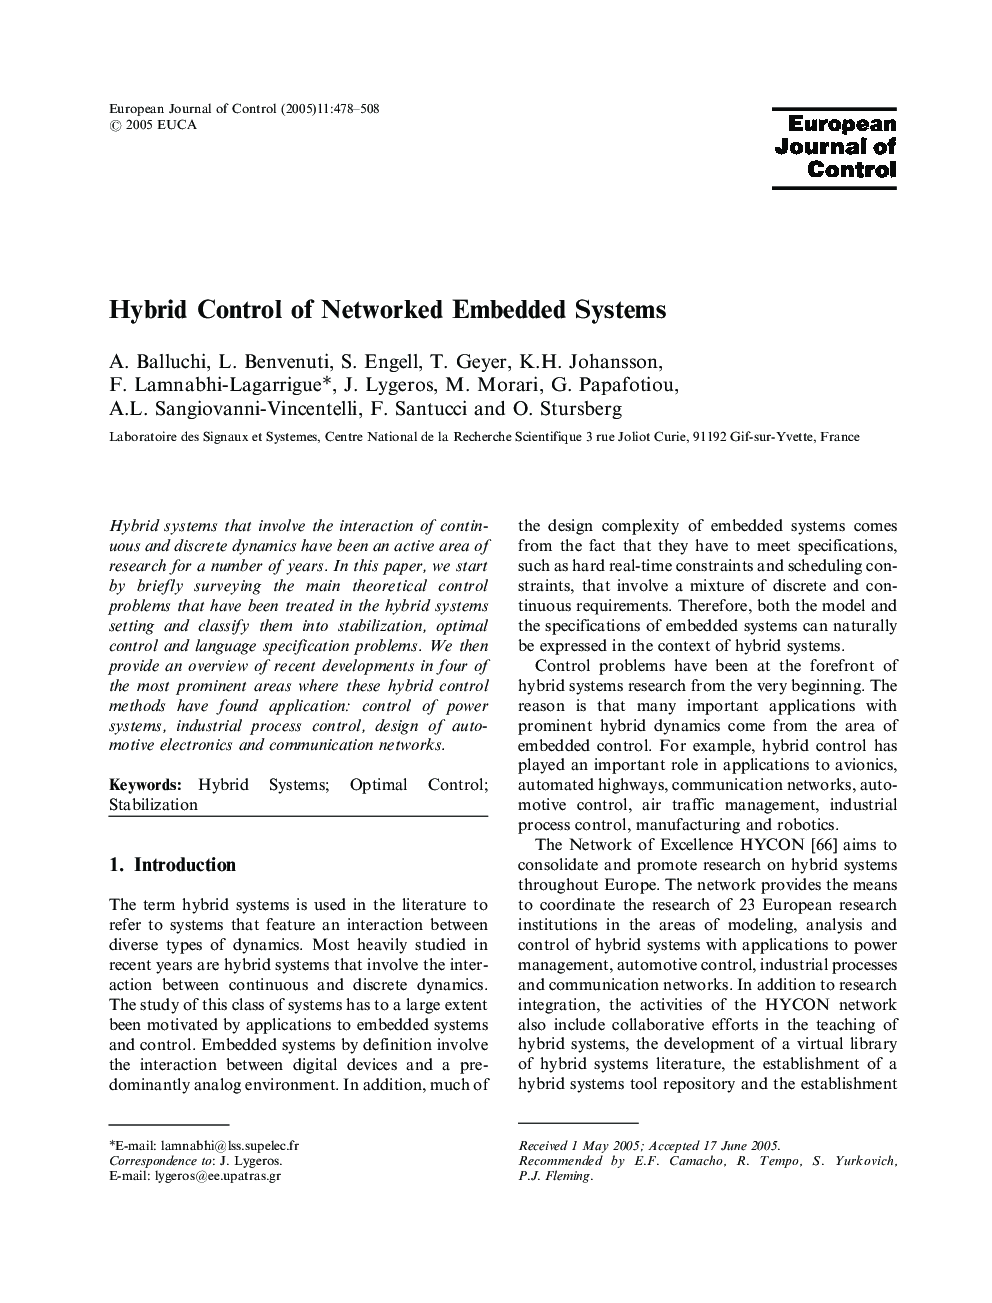 Hybrid Control of Networked Embedded Systems